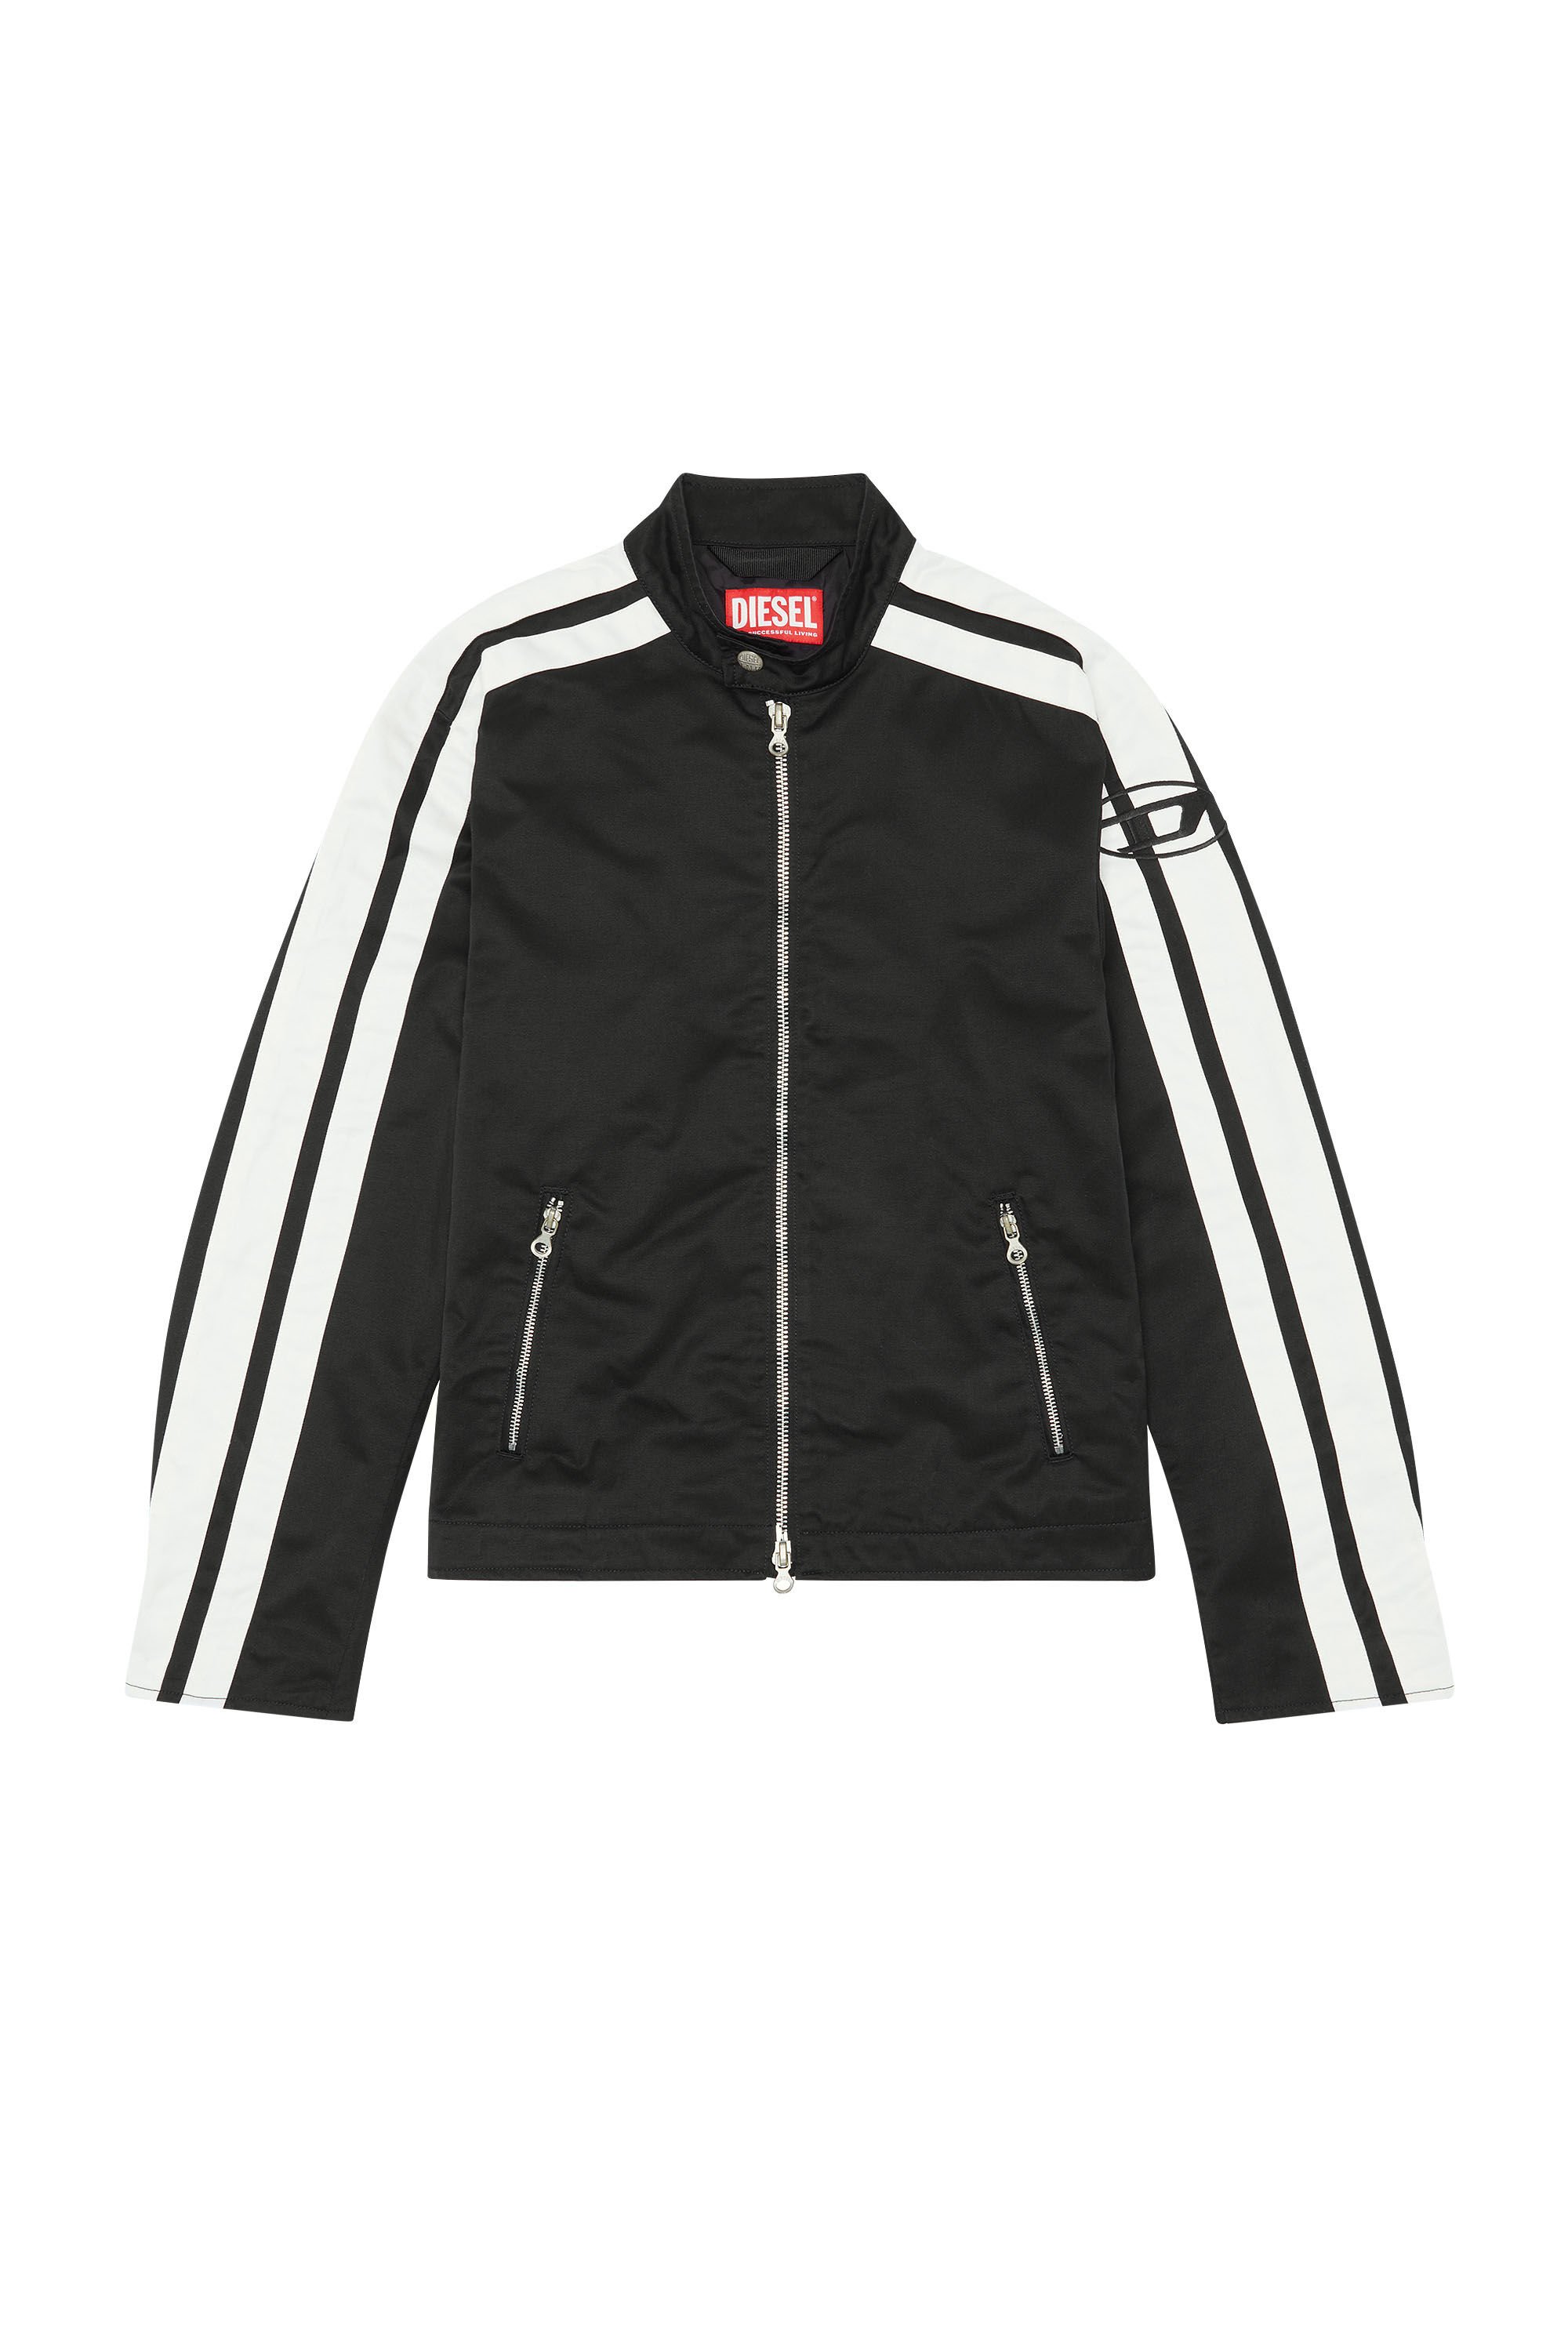 Diesel - J-BECK, Man Biker jacket in padded cotton with bands in Multicolor - Image 2